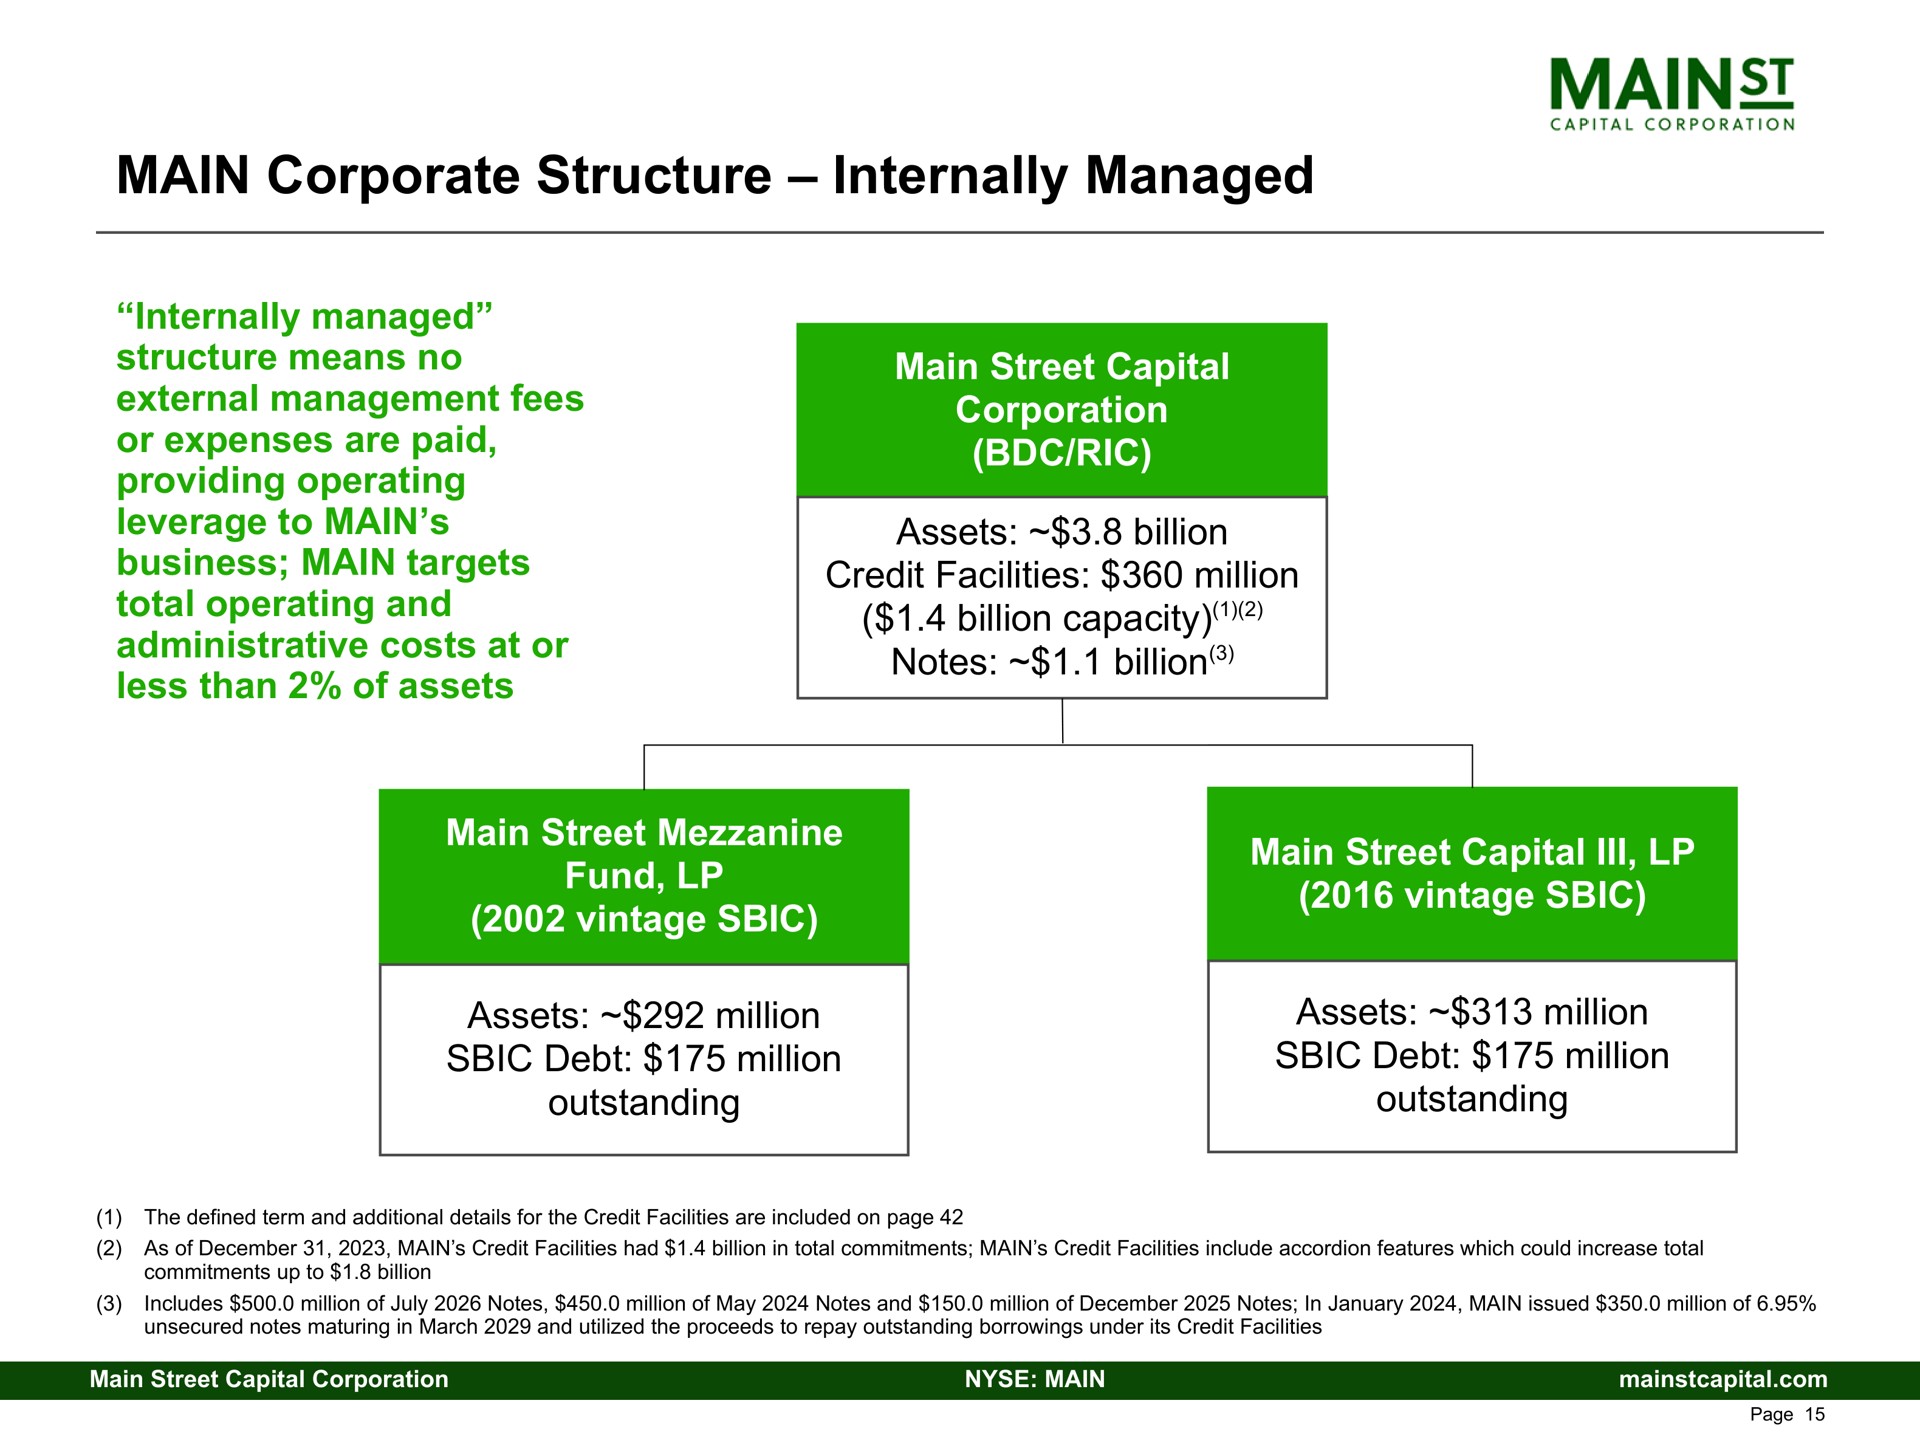 main corporate structure internally managed leverage to business targets assets billion credit facilities million | Main Street Capital